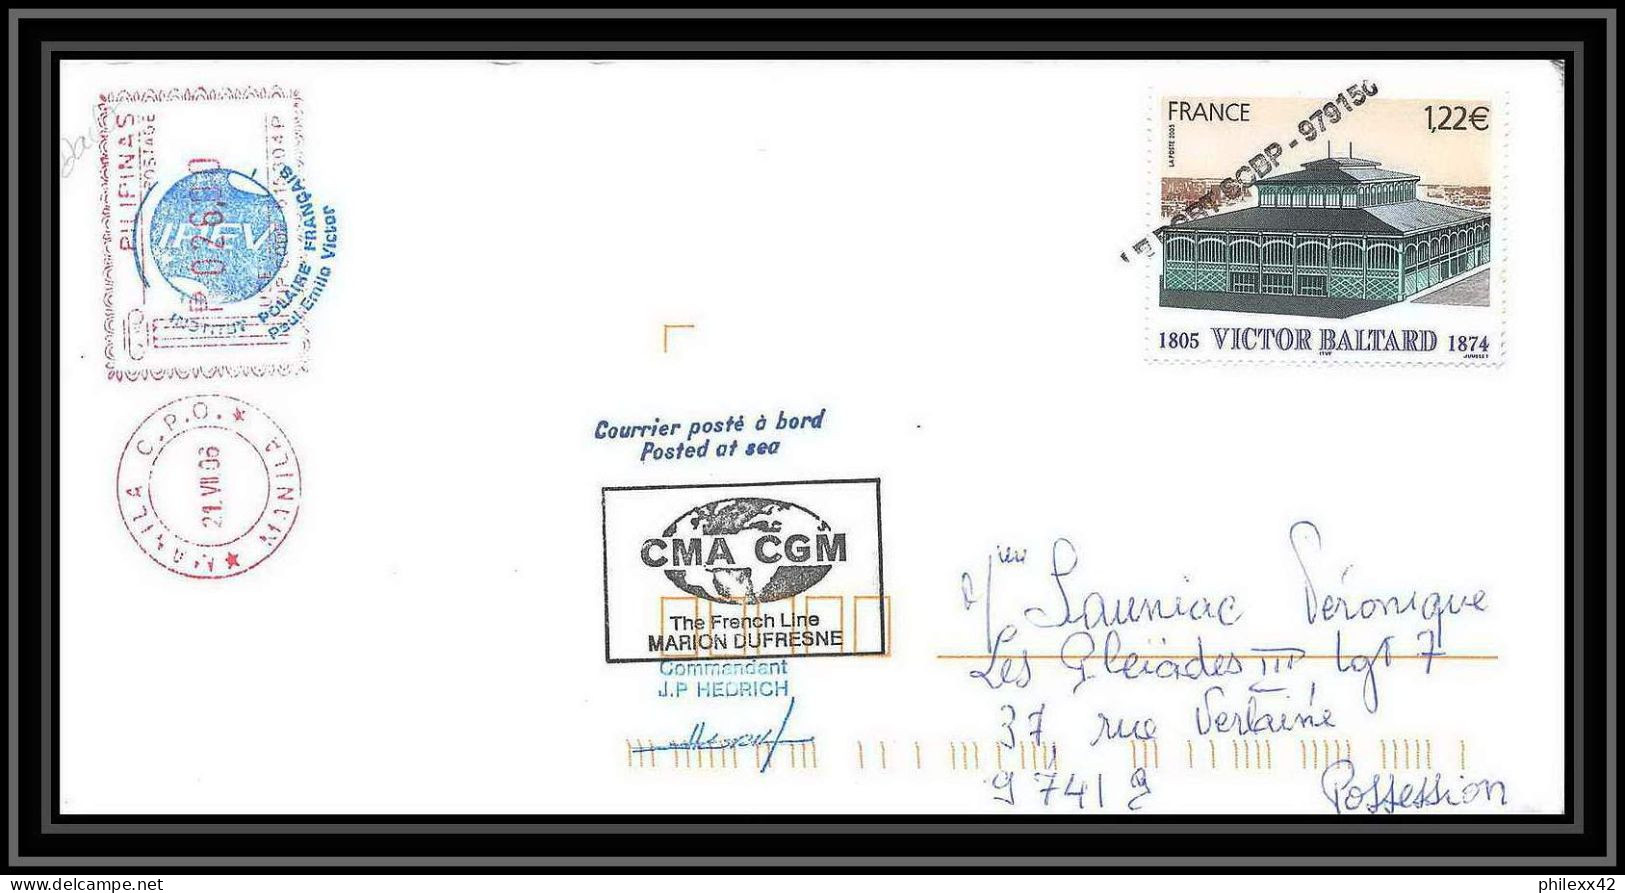 2591 ANTARCTIC Taaf Philippines Pilipinas Mixte Lettre Cover Dufresne 2 Signé Signed Md 155 Marco Polo 2 2006 Papillons - Antarctic Expeditions